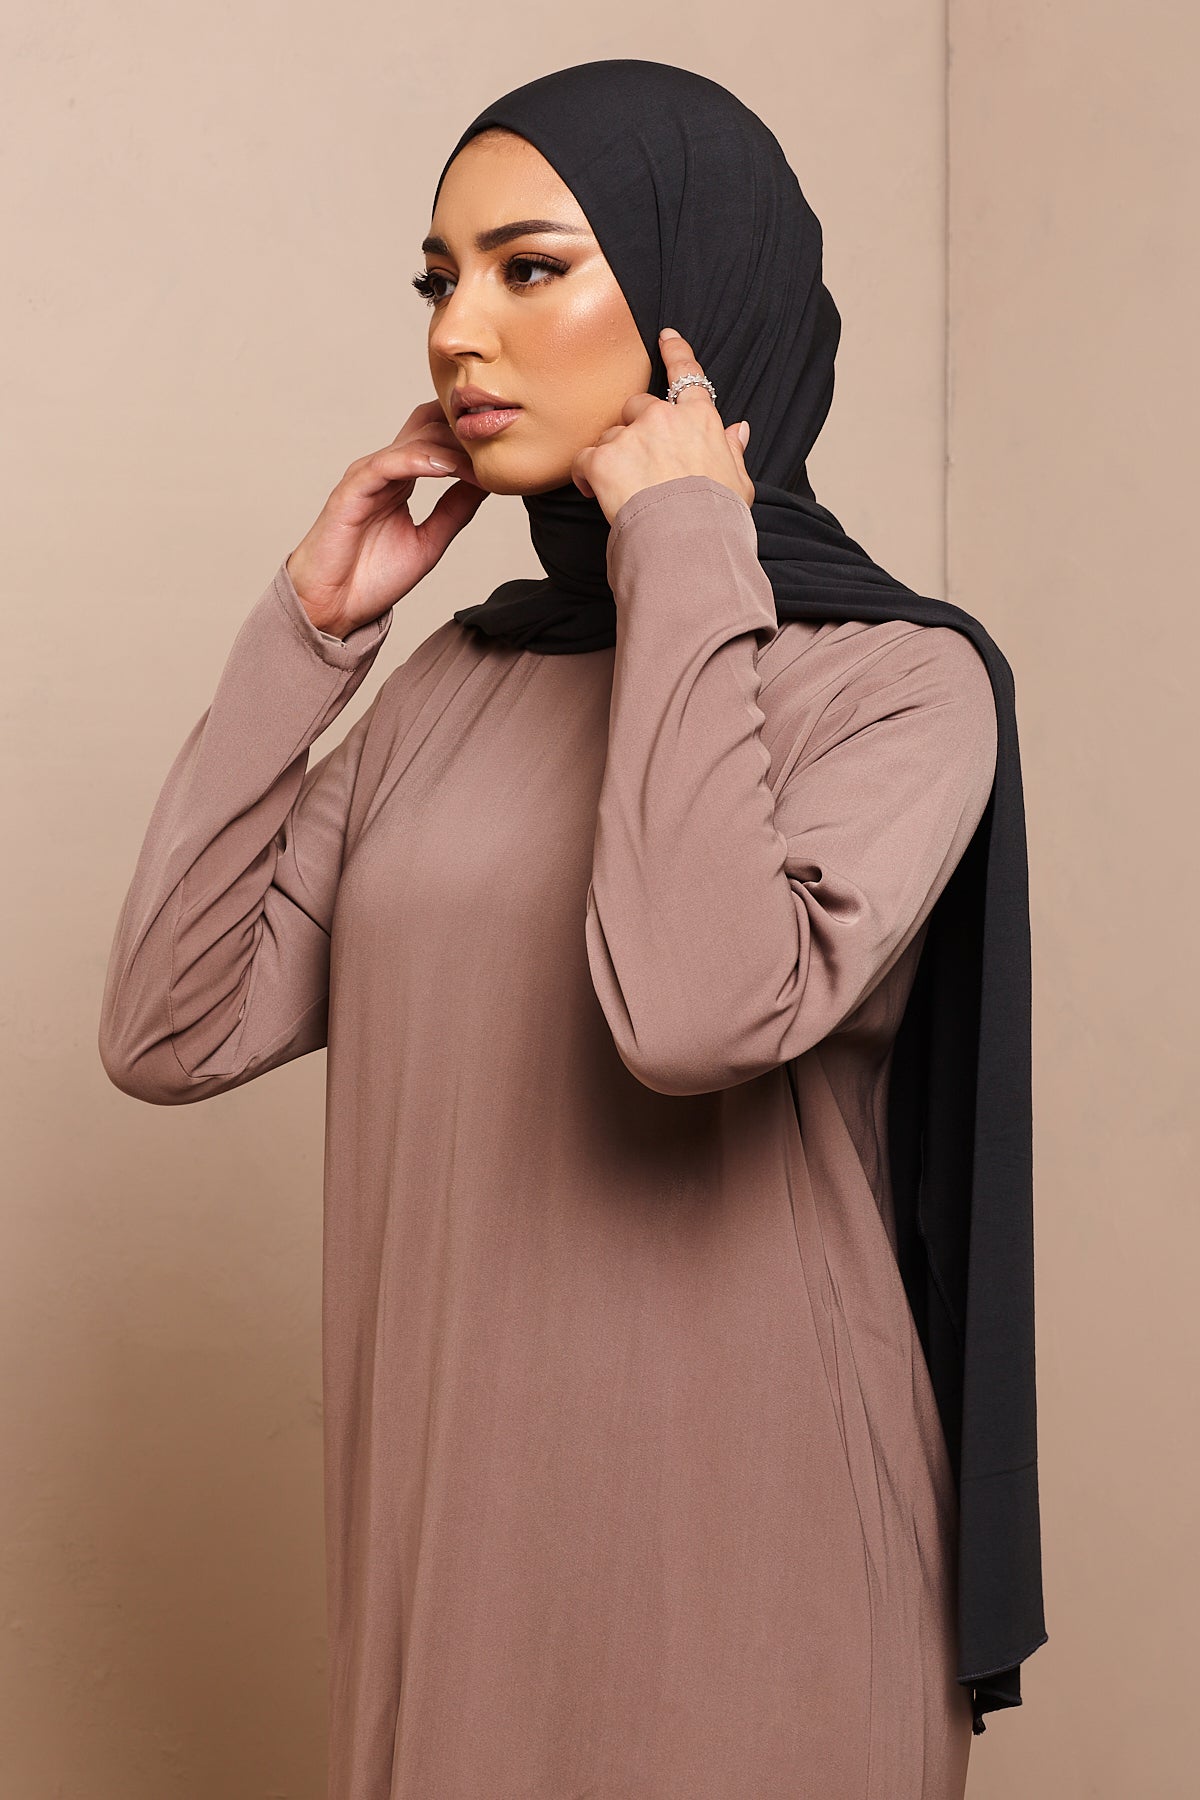 Charcoal Soft Bamboo Jersey Hijab - CAVE